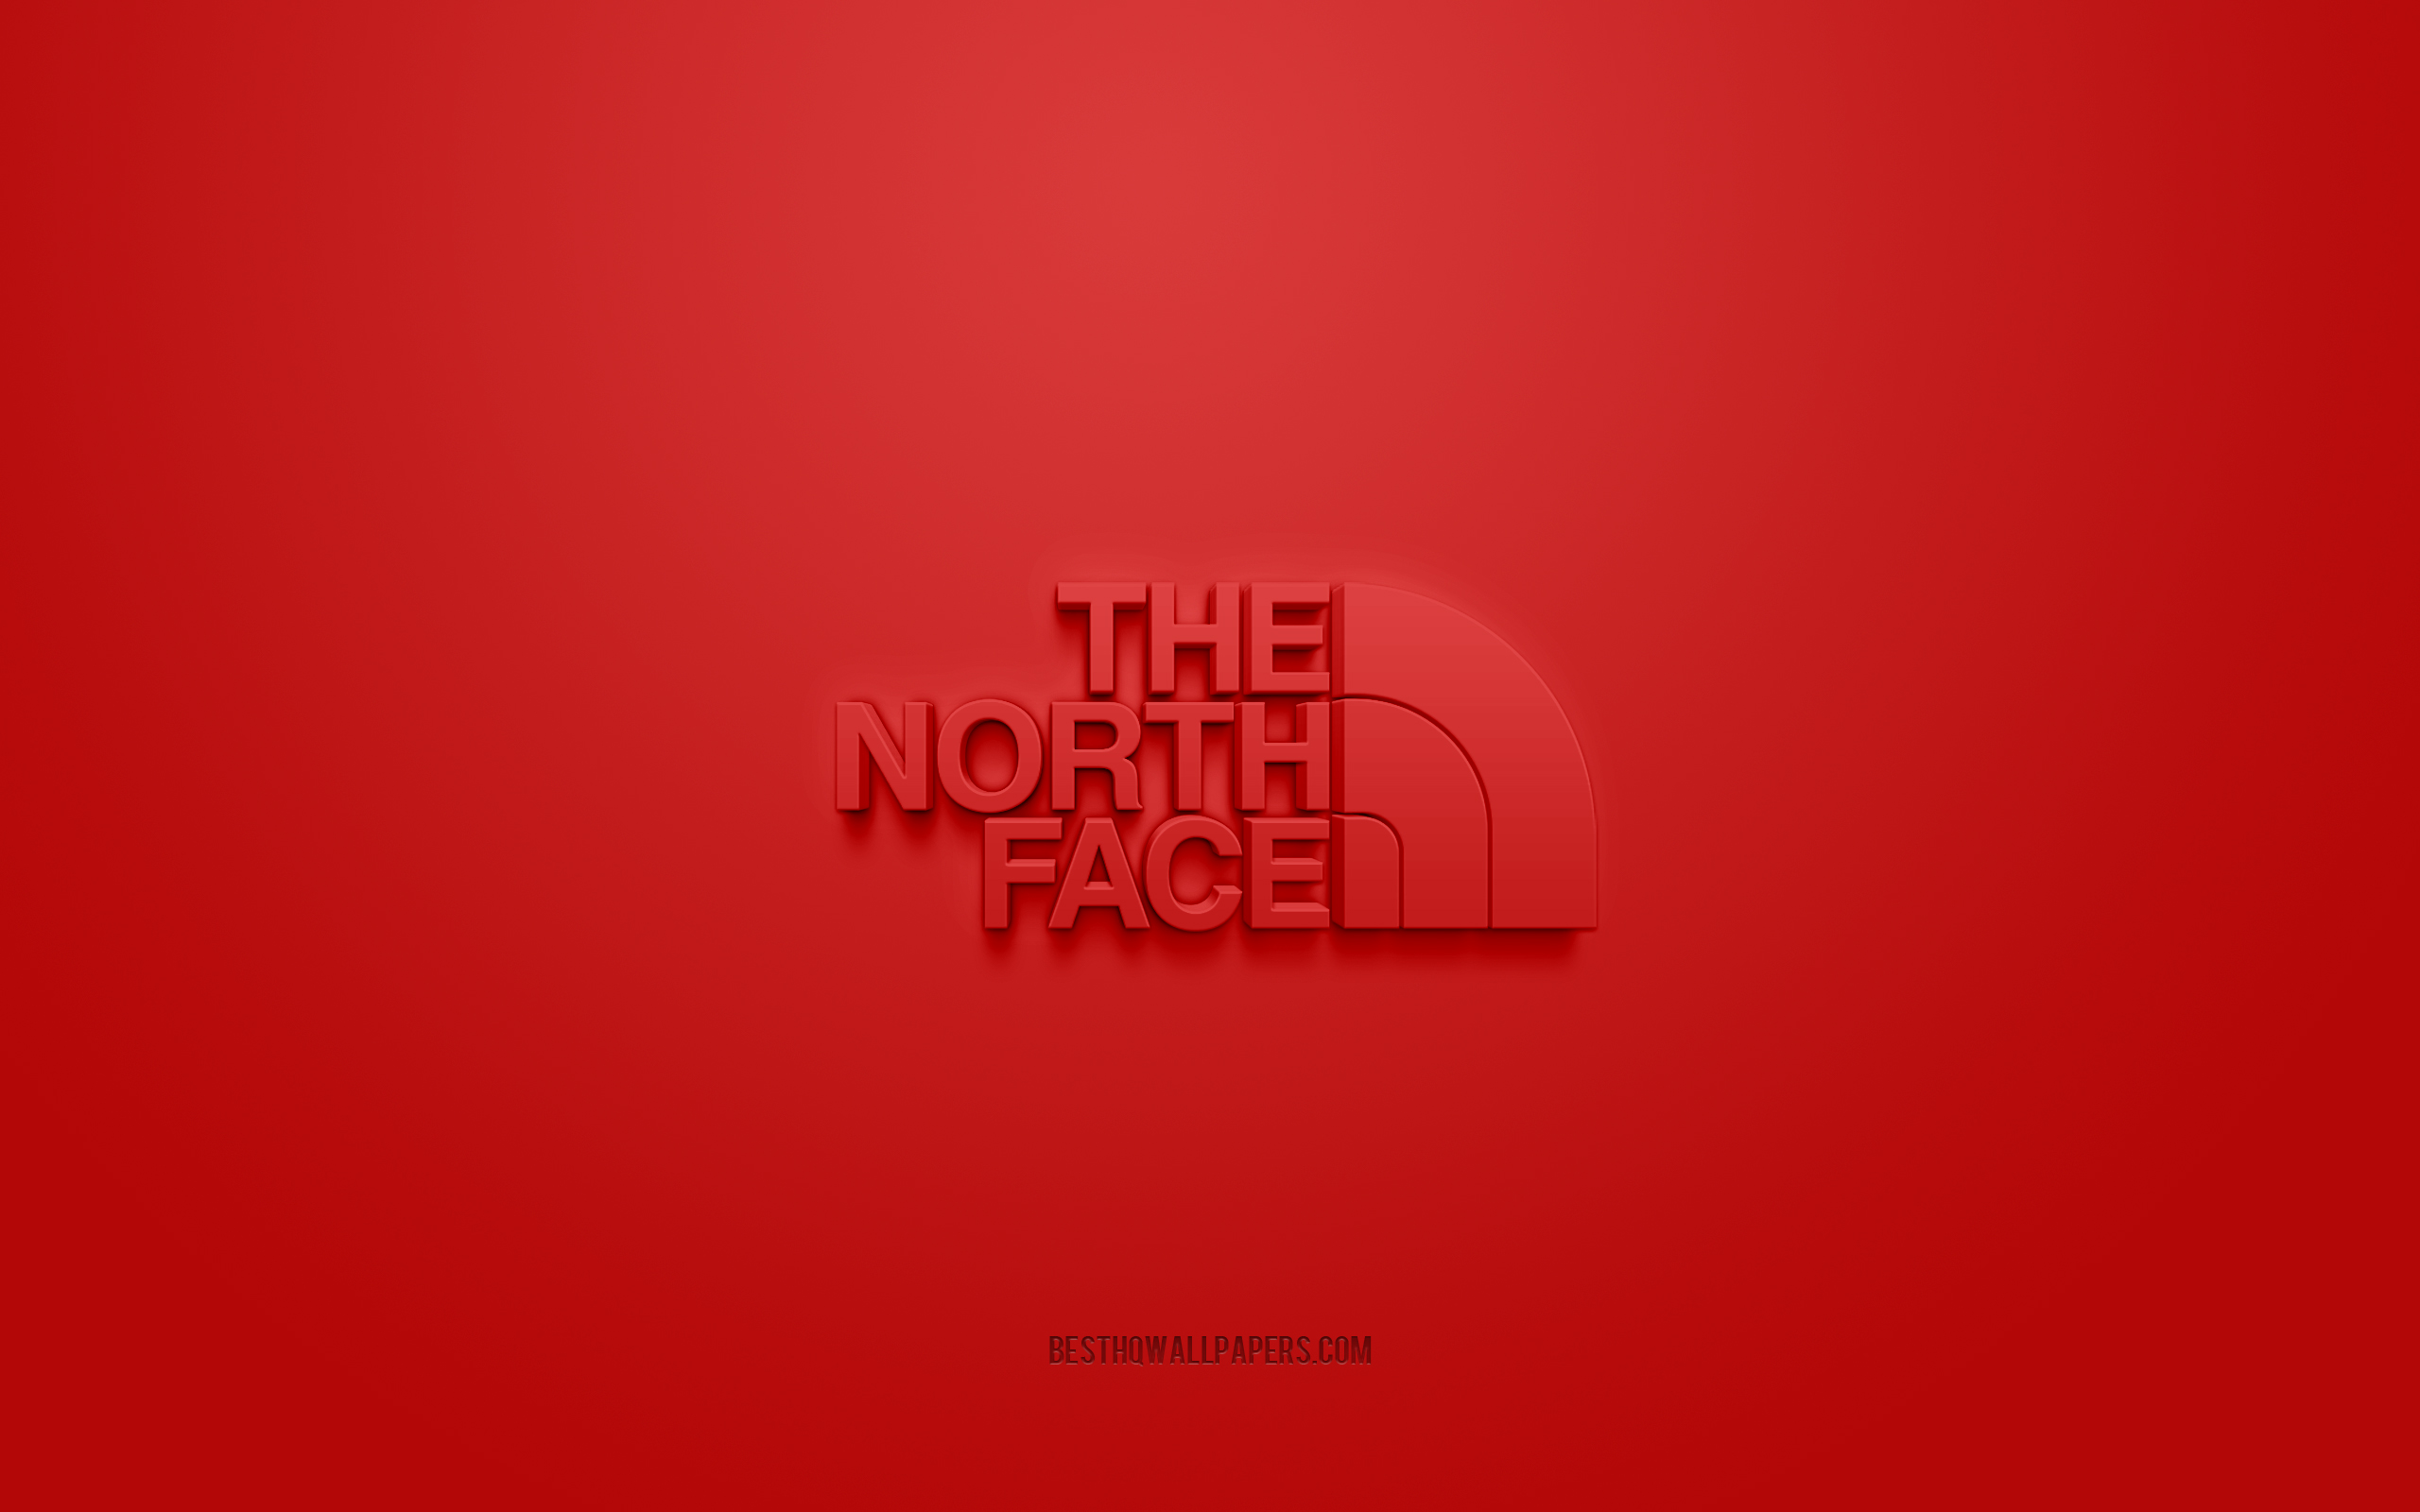 Download wallpapers The North Face logo, red background, The North Face 3d  logo, 3d art, The North Face, brands logo, red 3d The North Face logo for  desktop with resolution 2560x1600. High